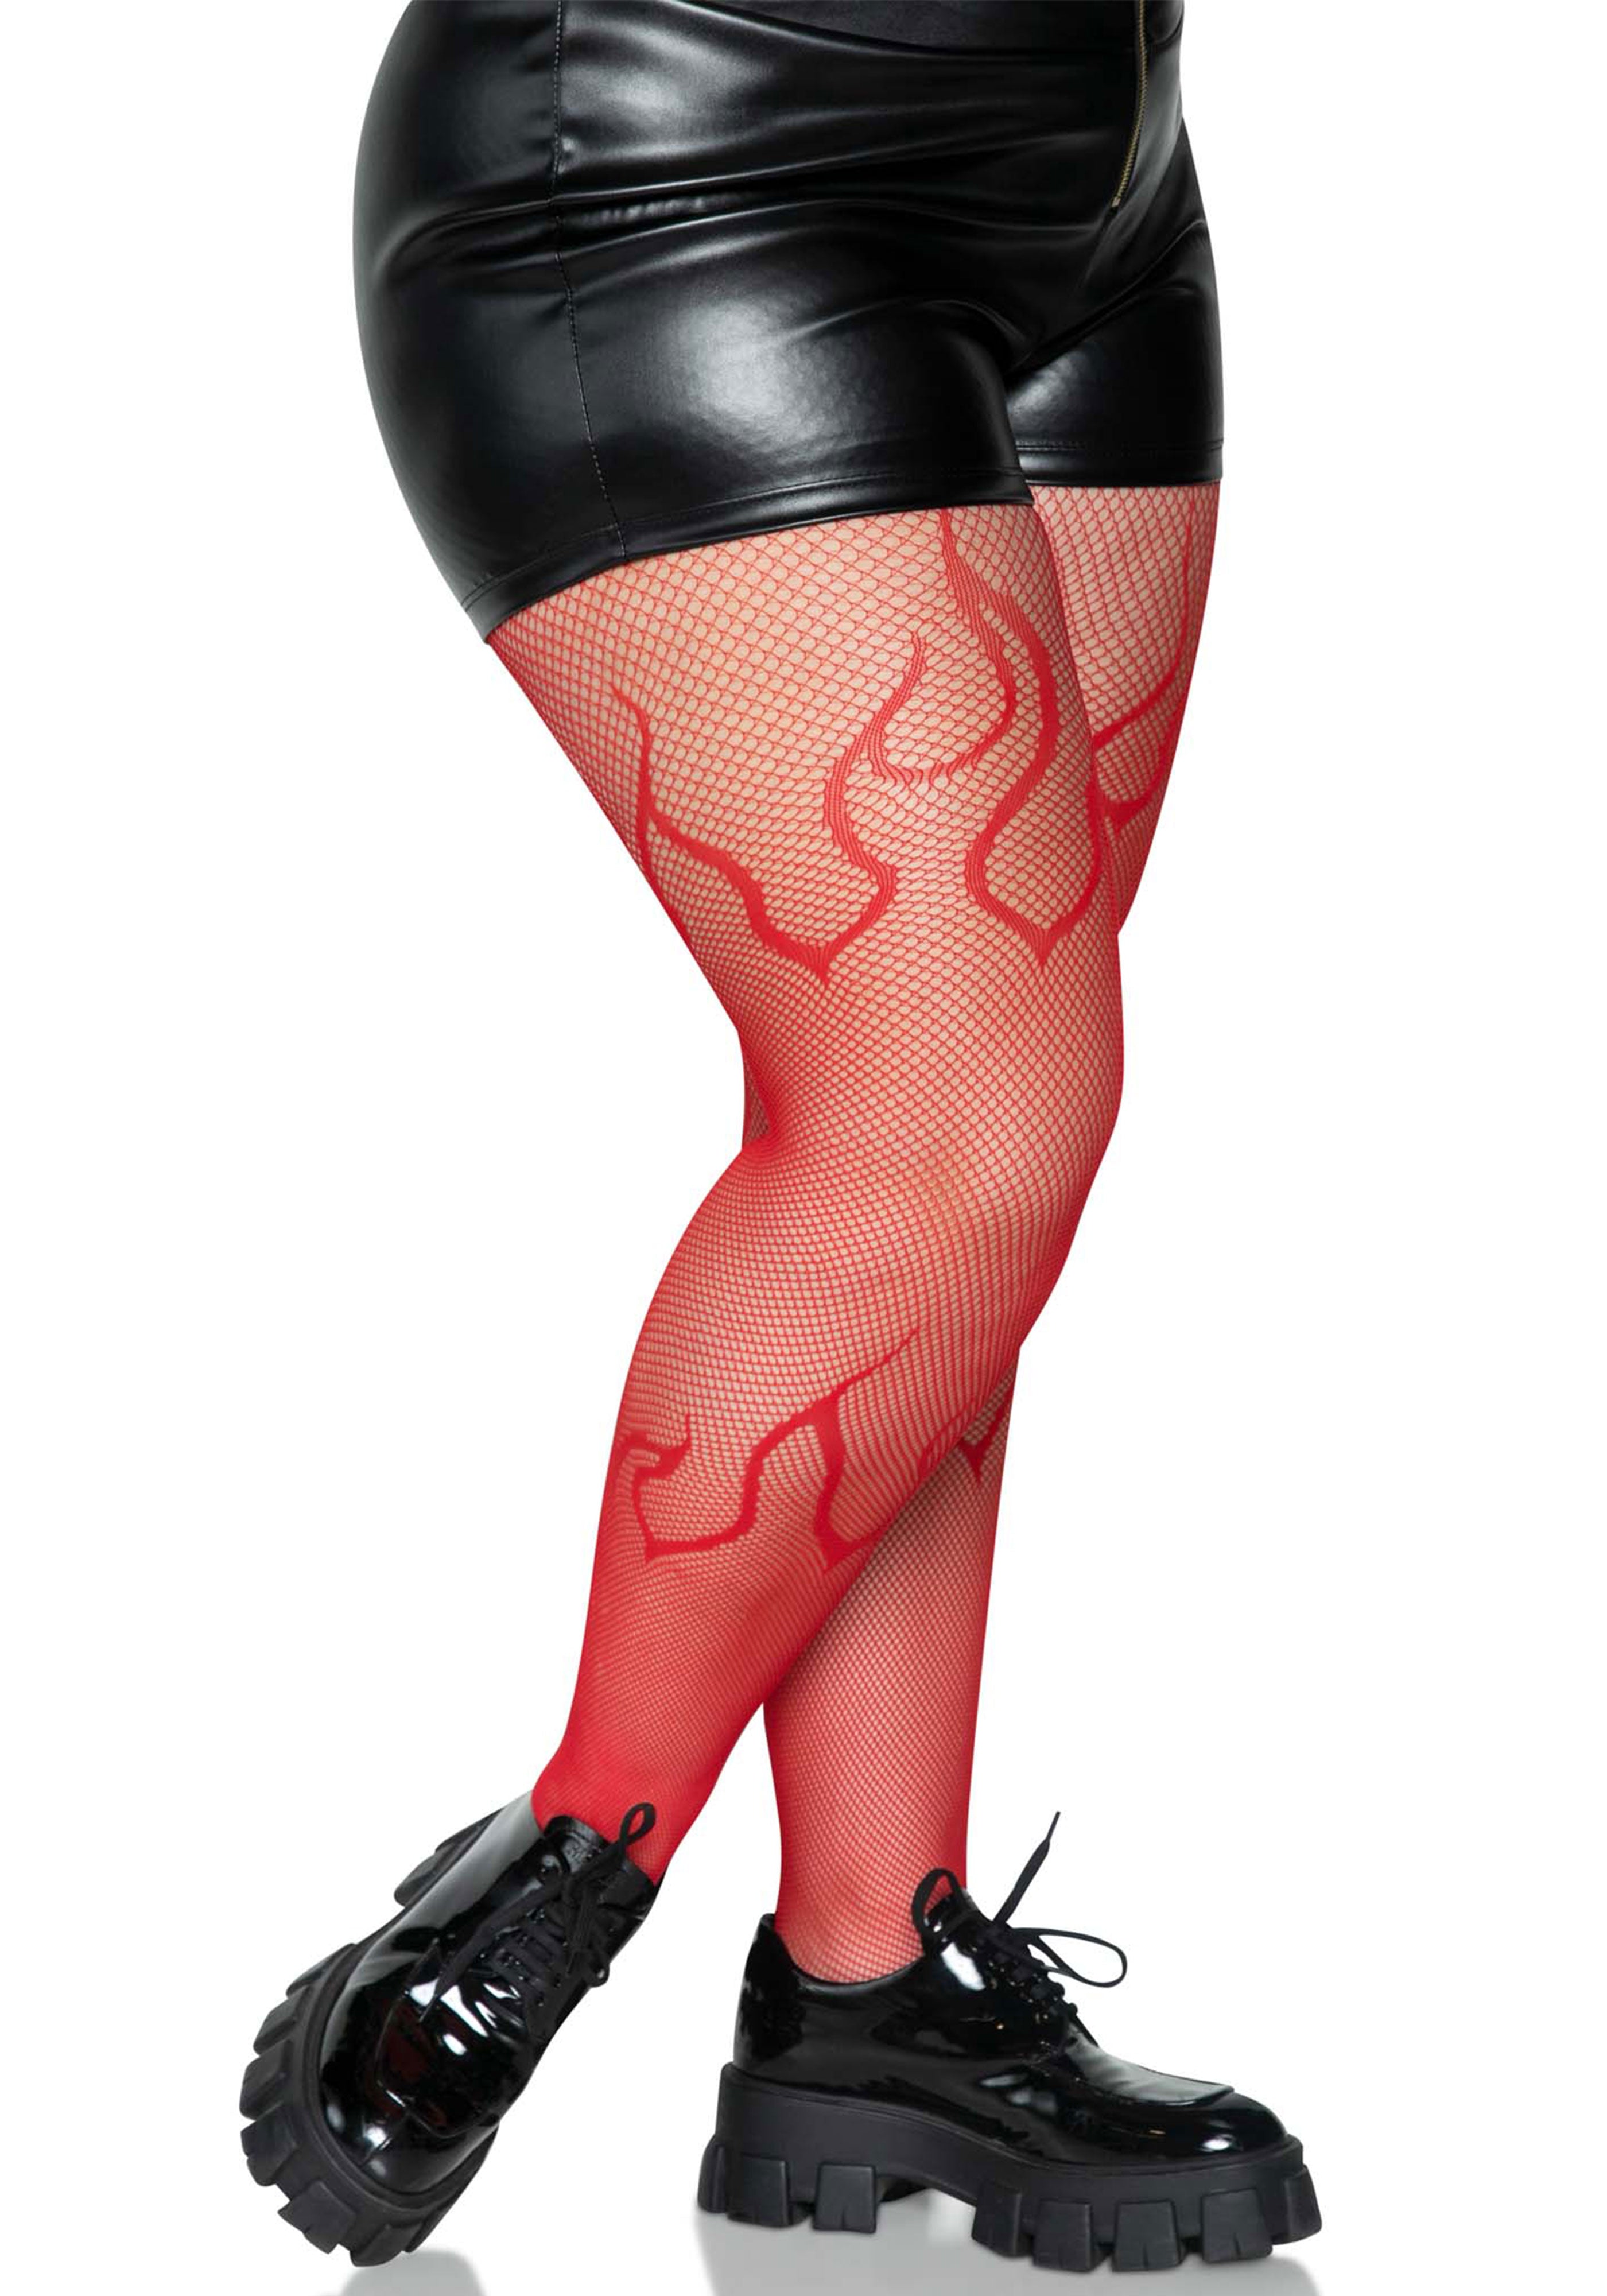 Flame Plus Fishnet Tights